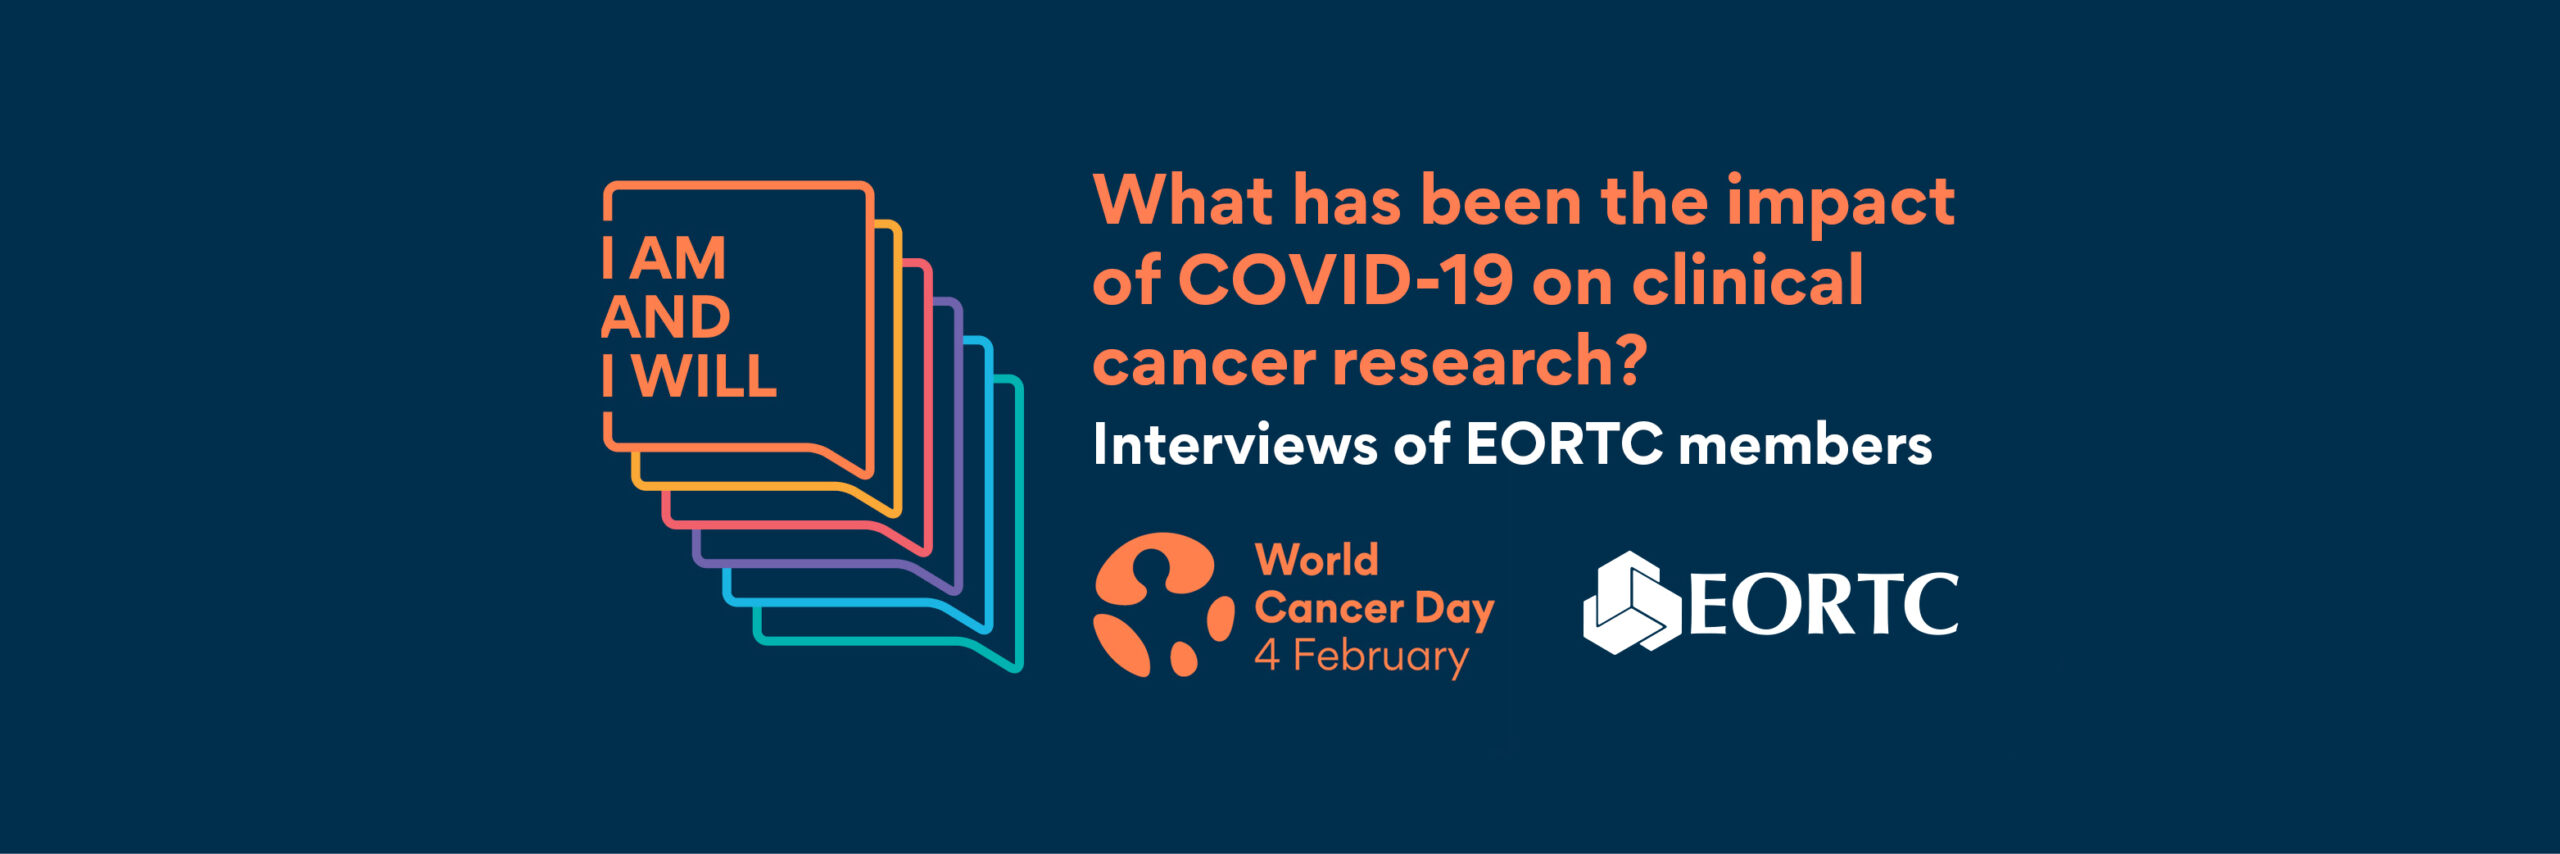 What has been the impact of COVID-19 on clinical cancer research?